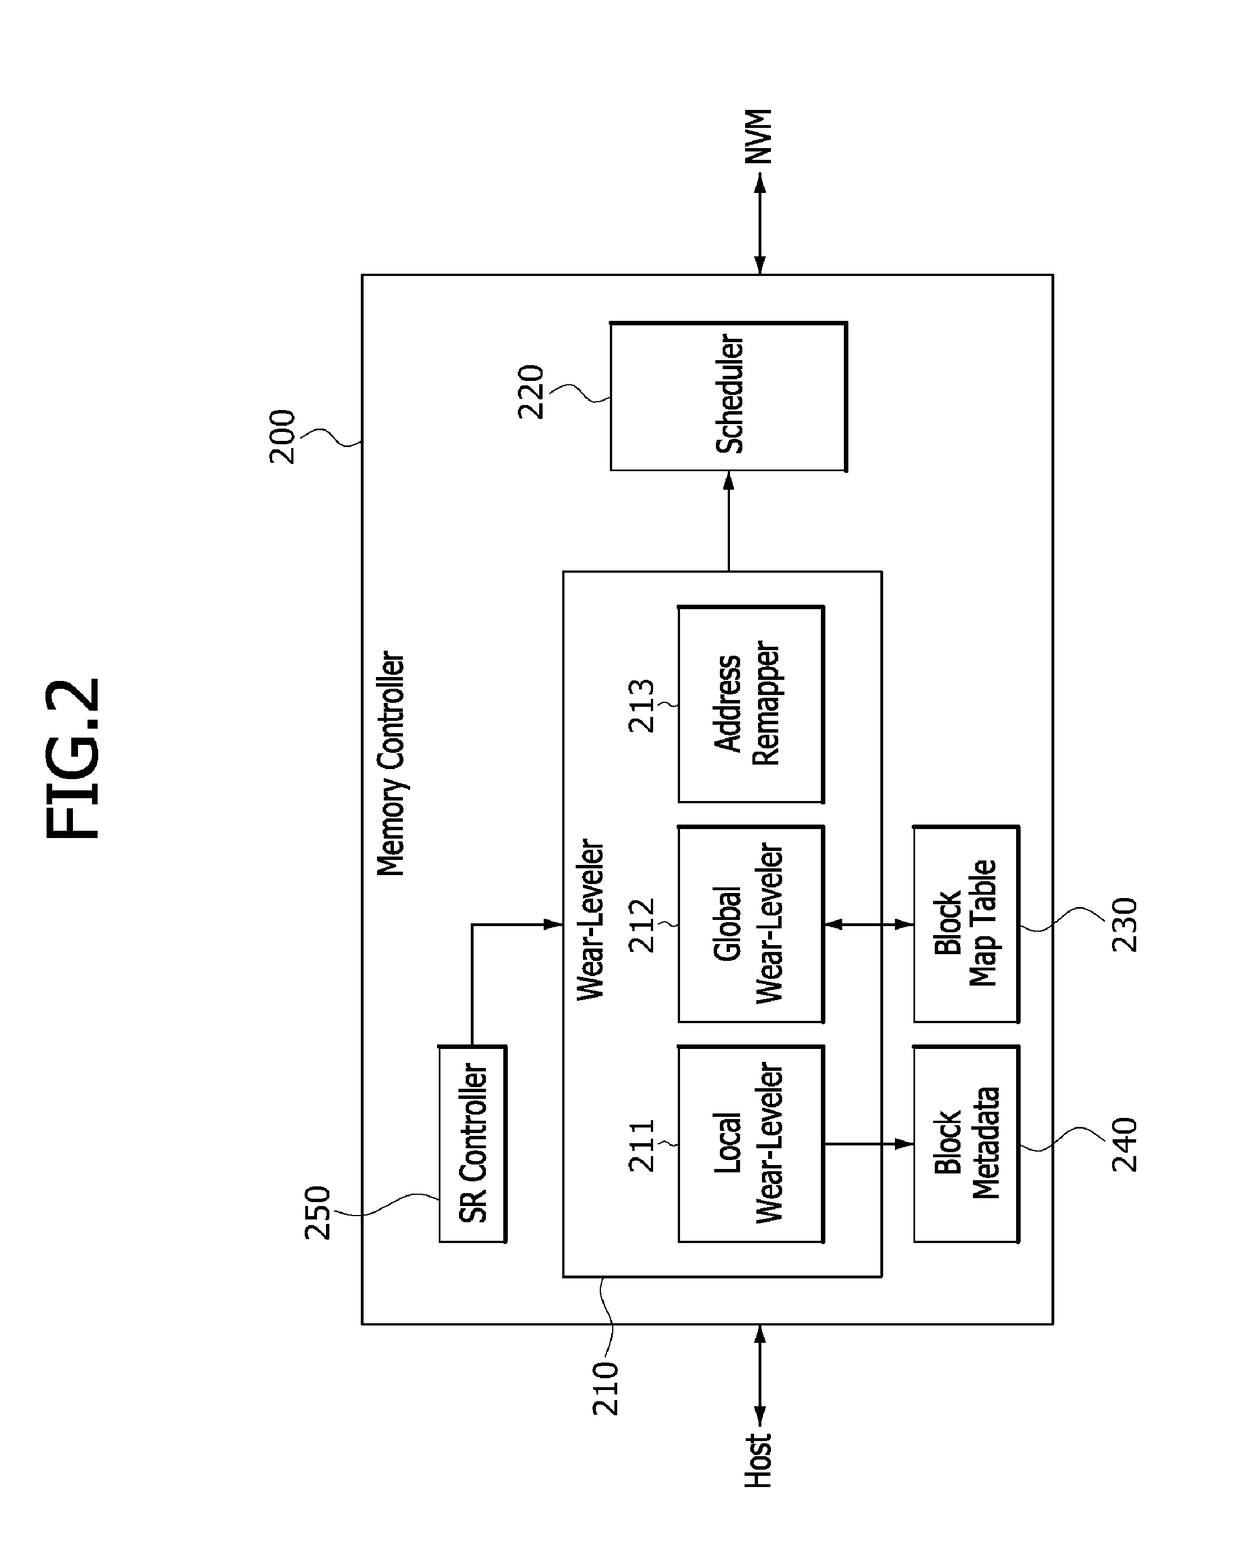 Memory apparatus and method of wear-leveling of a memory apparatus